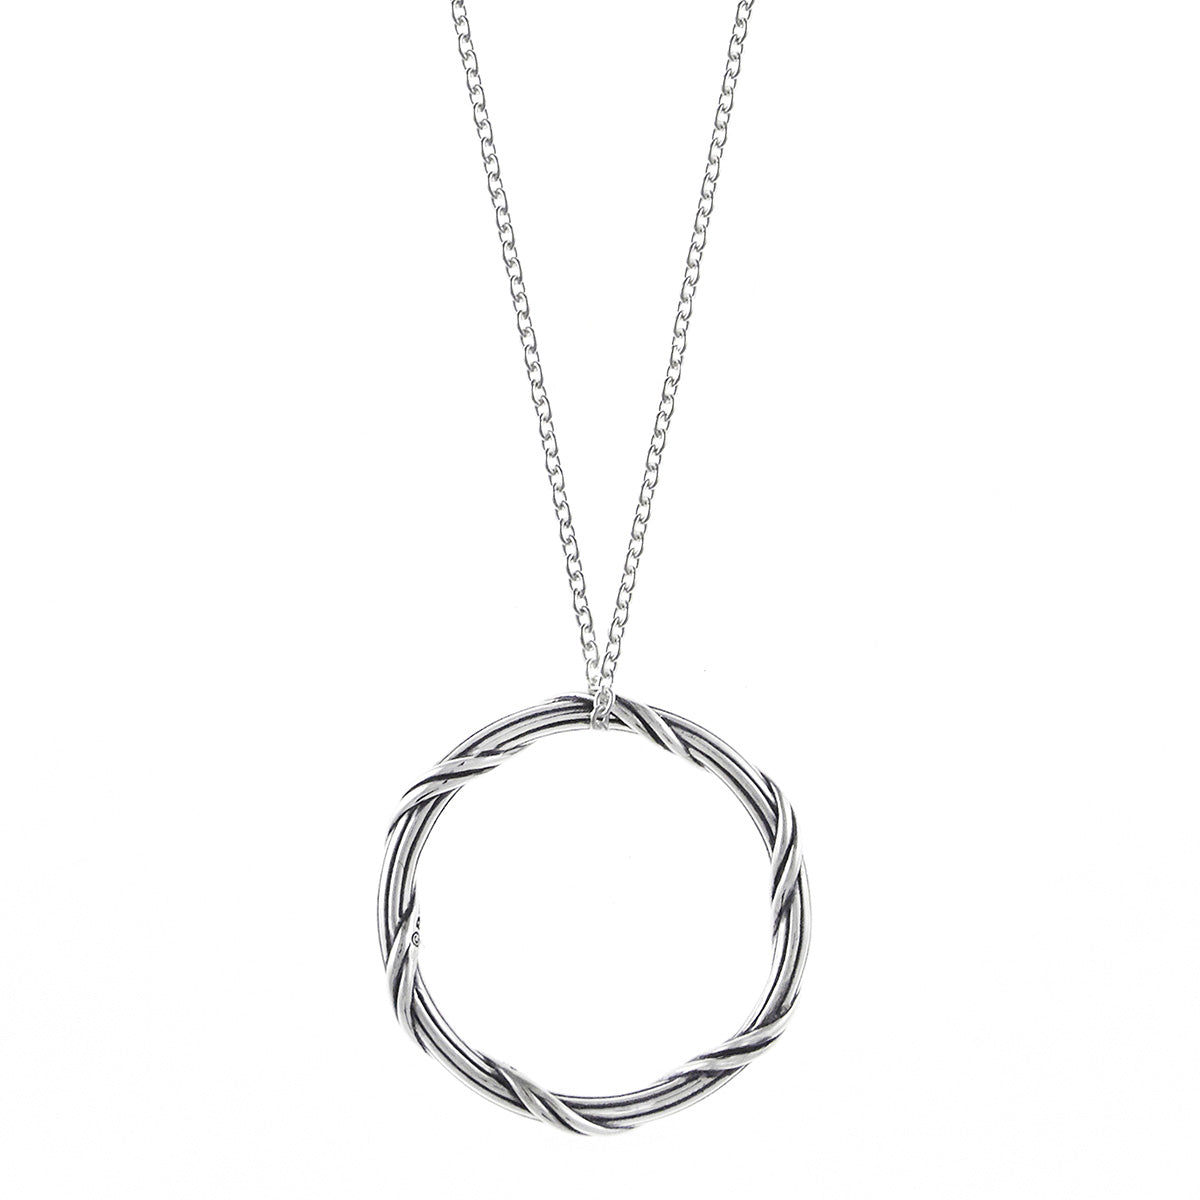 Signature Romance Circle Necklace in sterling silver 1"